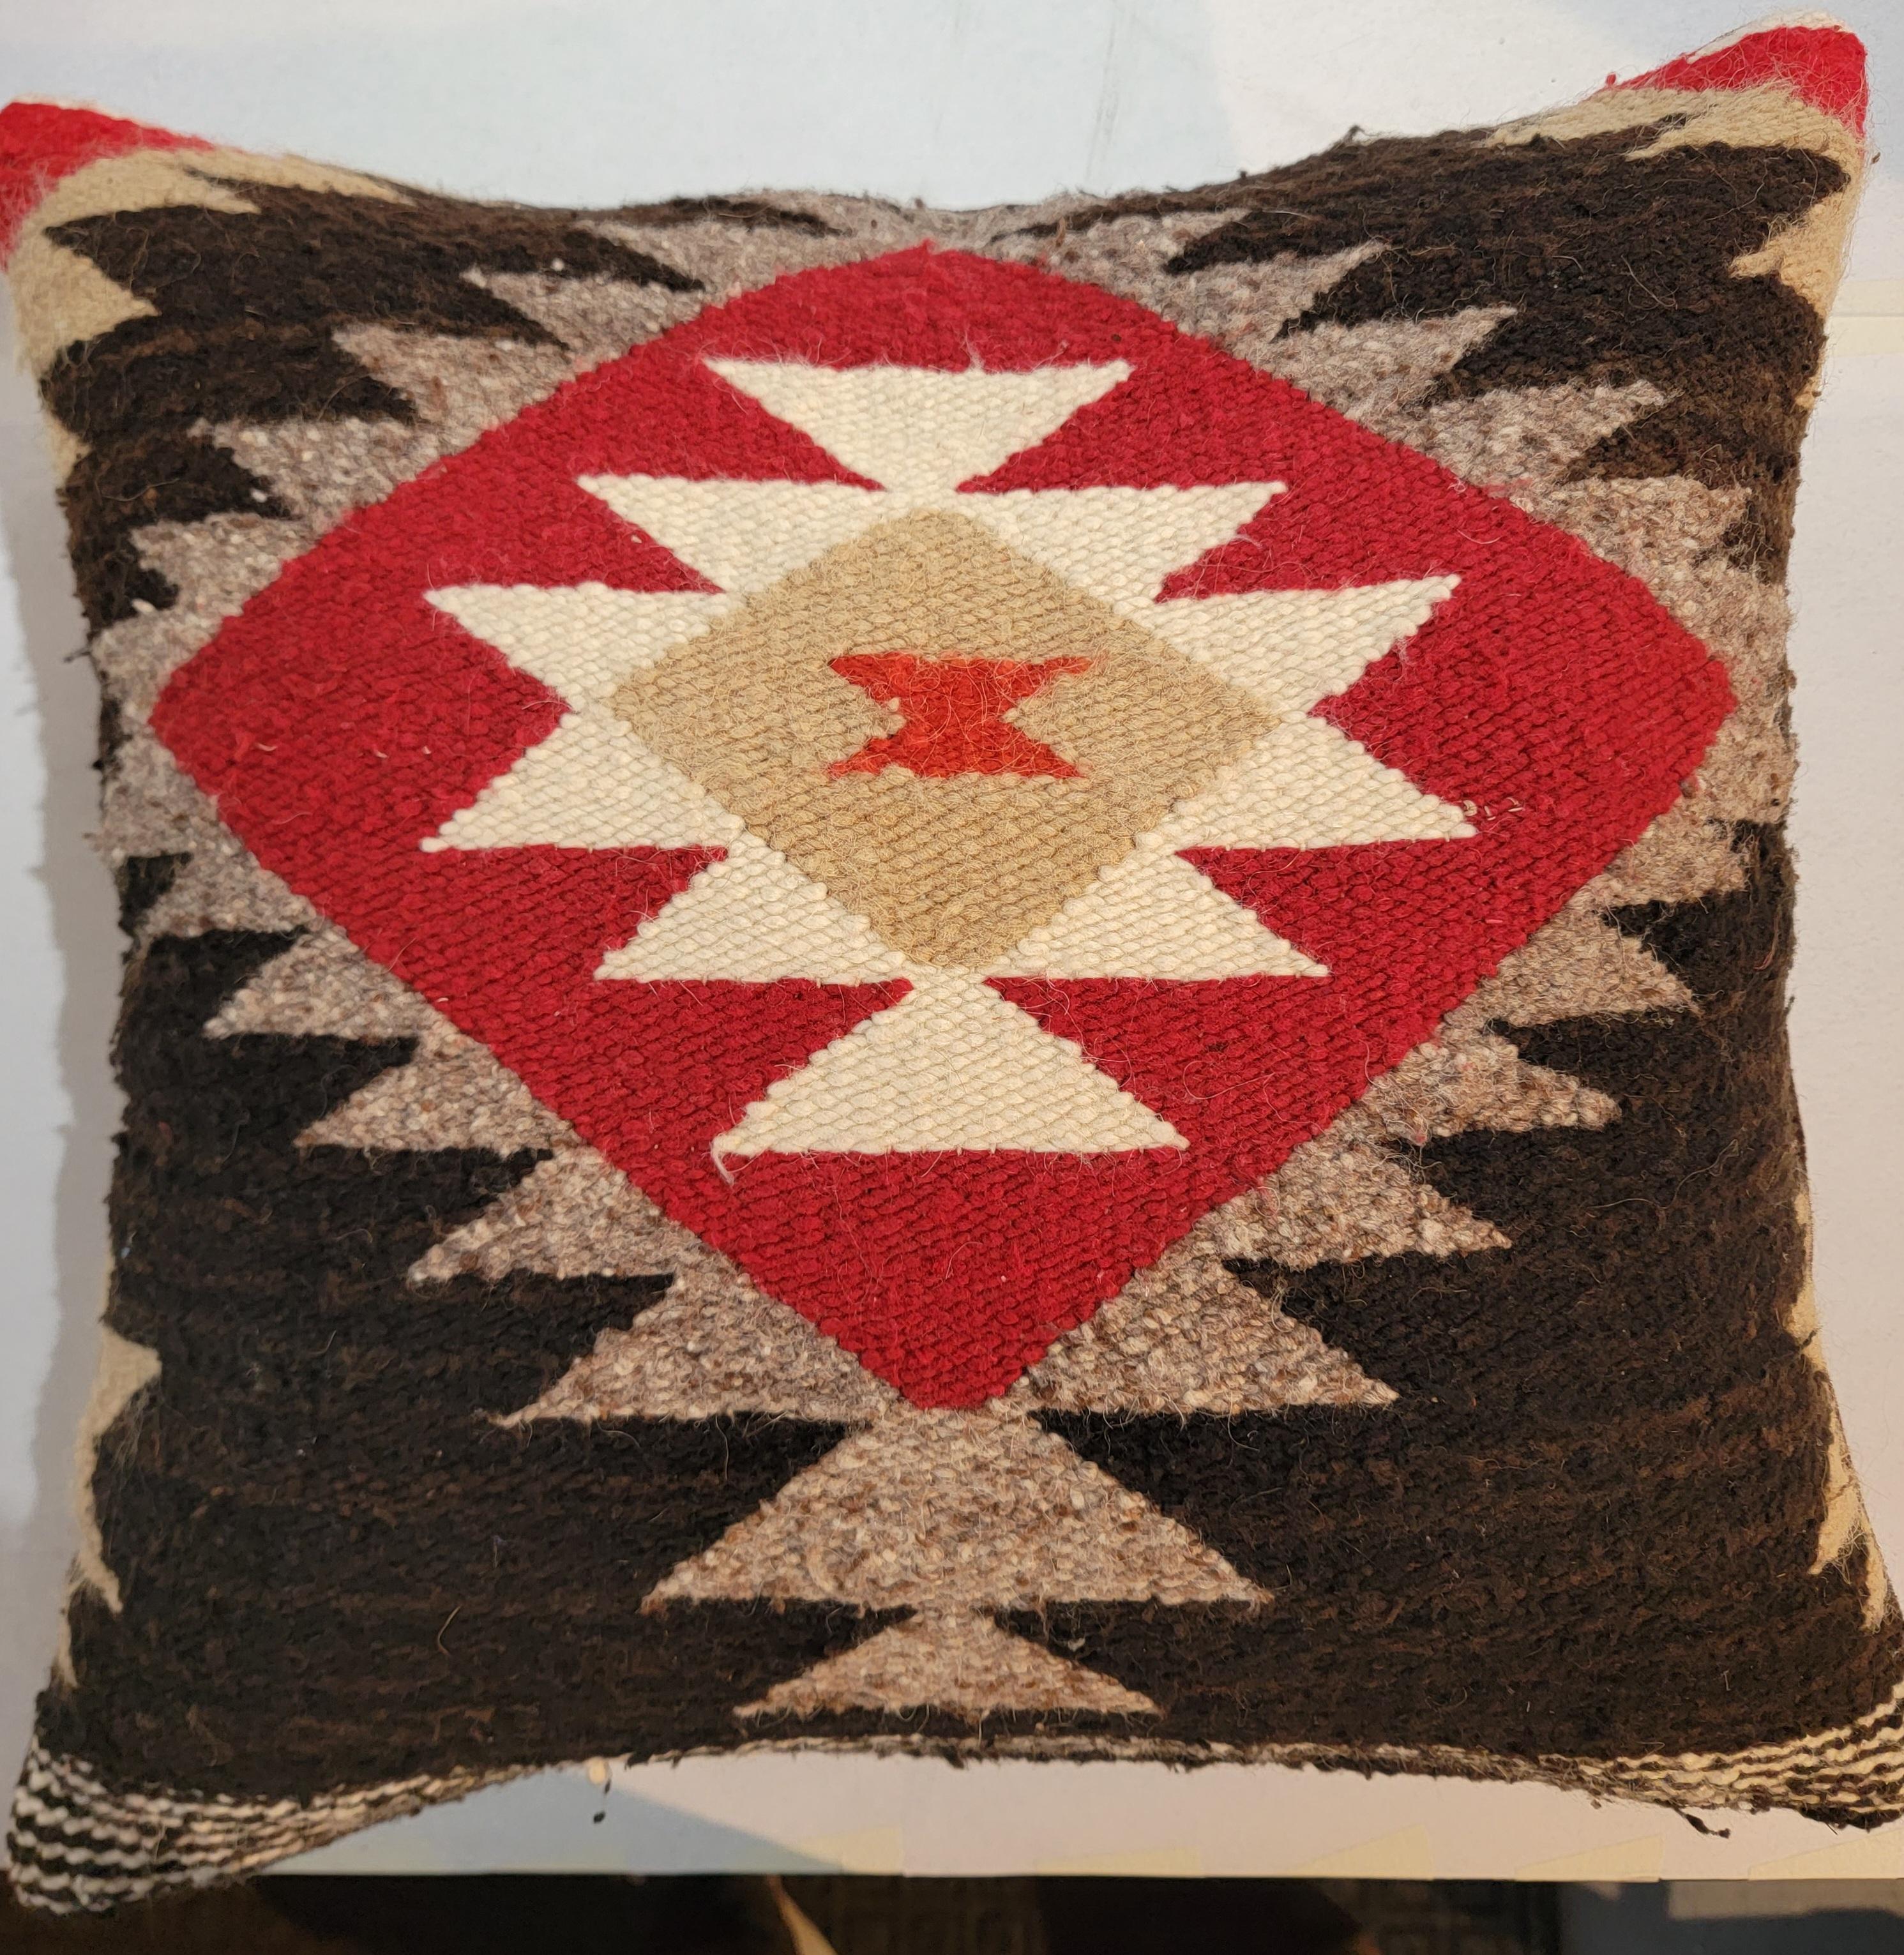 These Navajo Indian weaving pillows are in pristine condition. They are from a Indian weaving - saddle blanket pillows.The pair of pillows have mohair backings in mint condition.